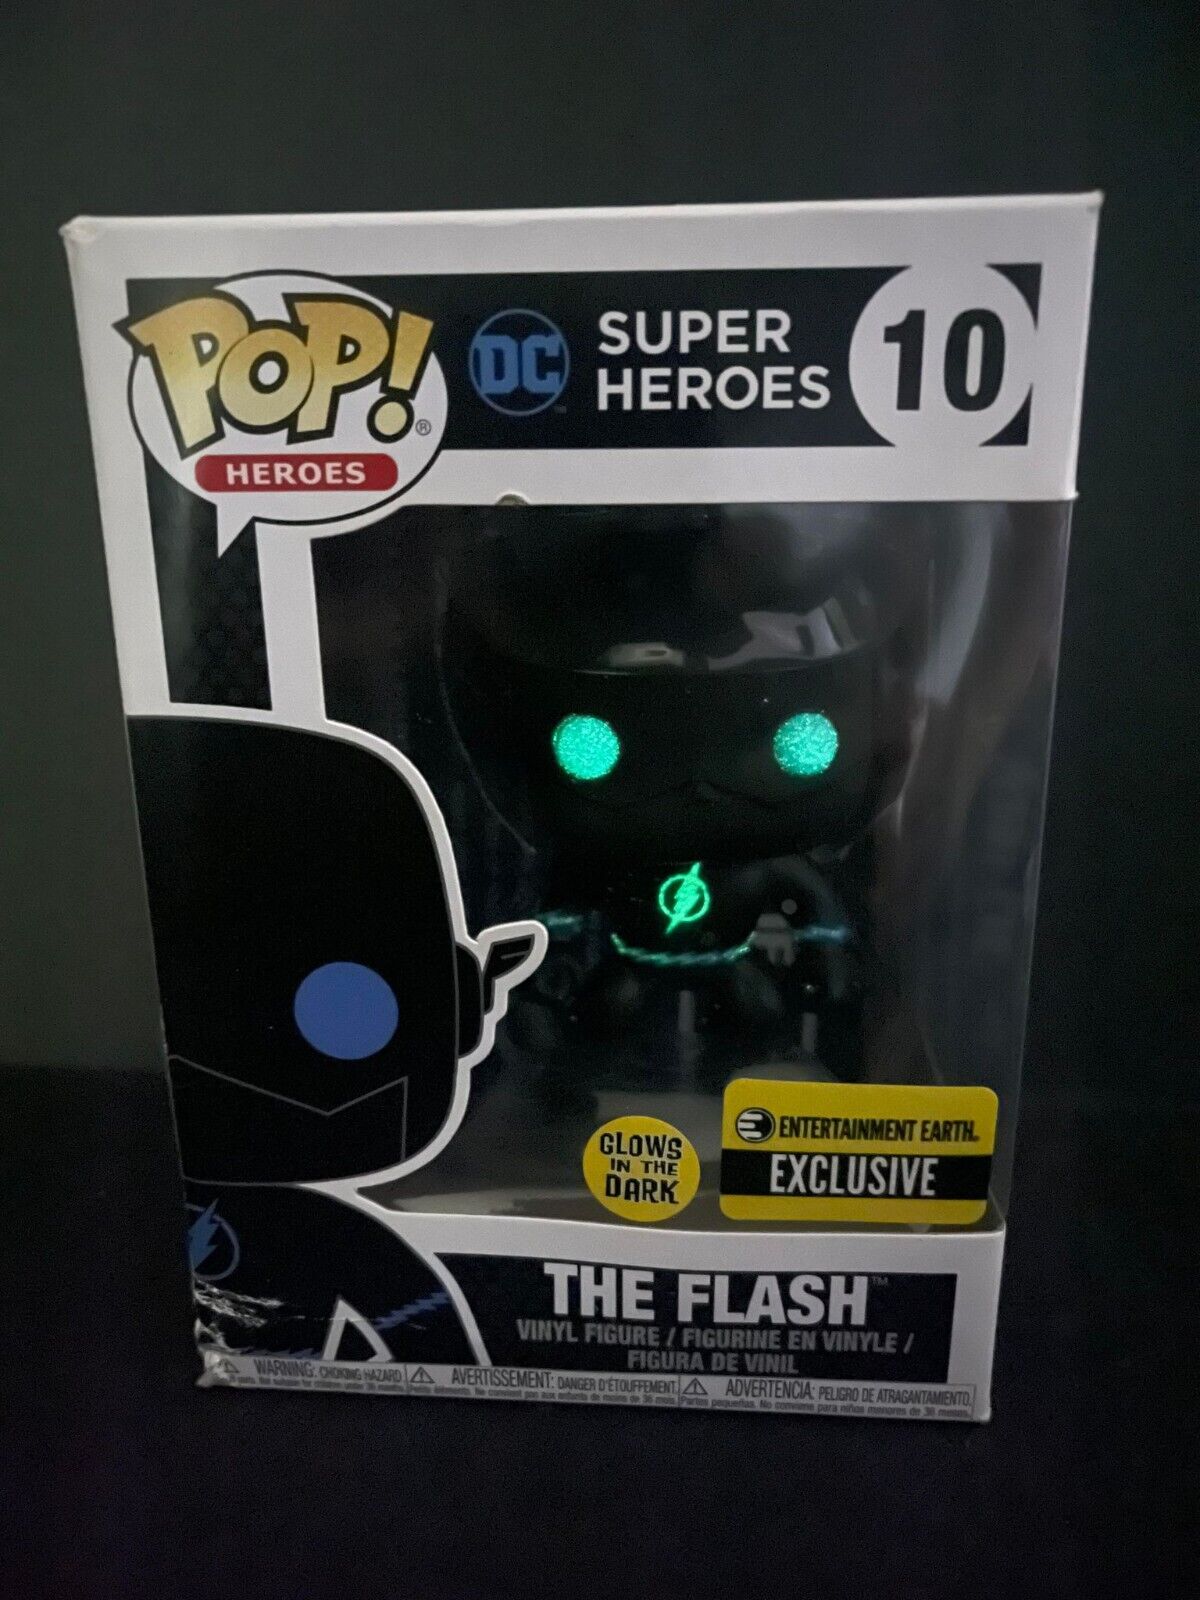 FUNKO POP! DC Super Heroes Entertainment Earth Exclusive The Flash